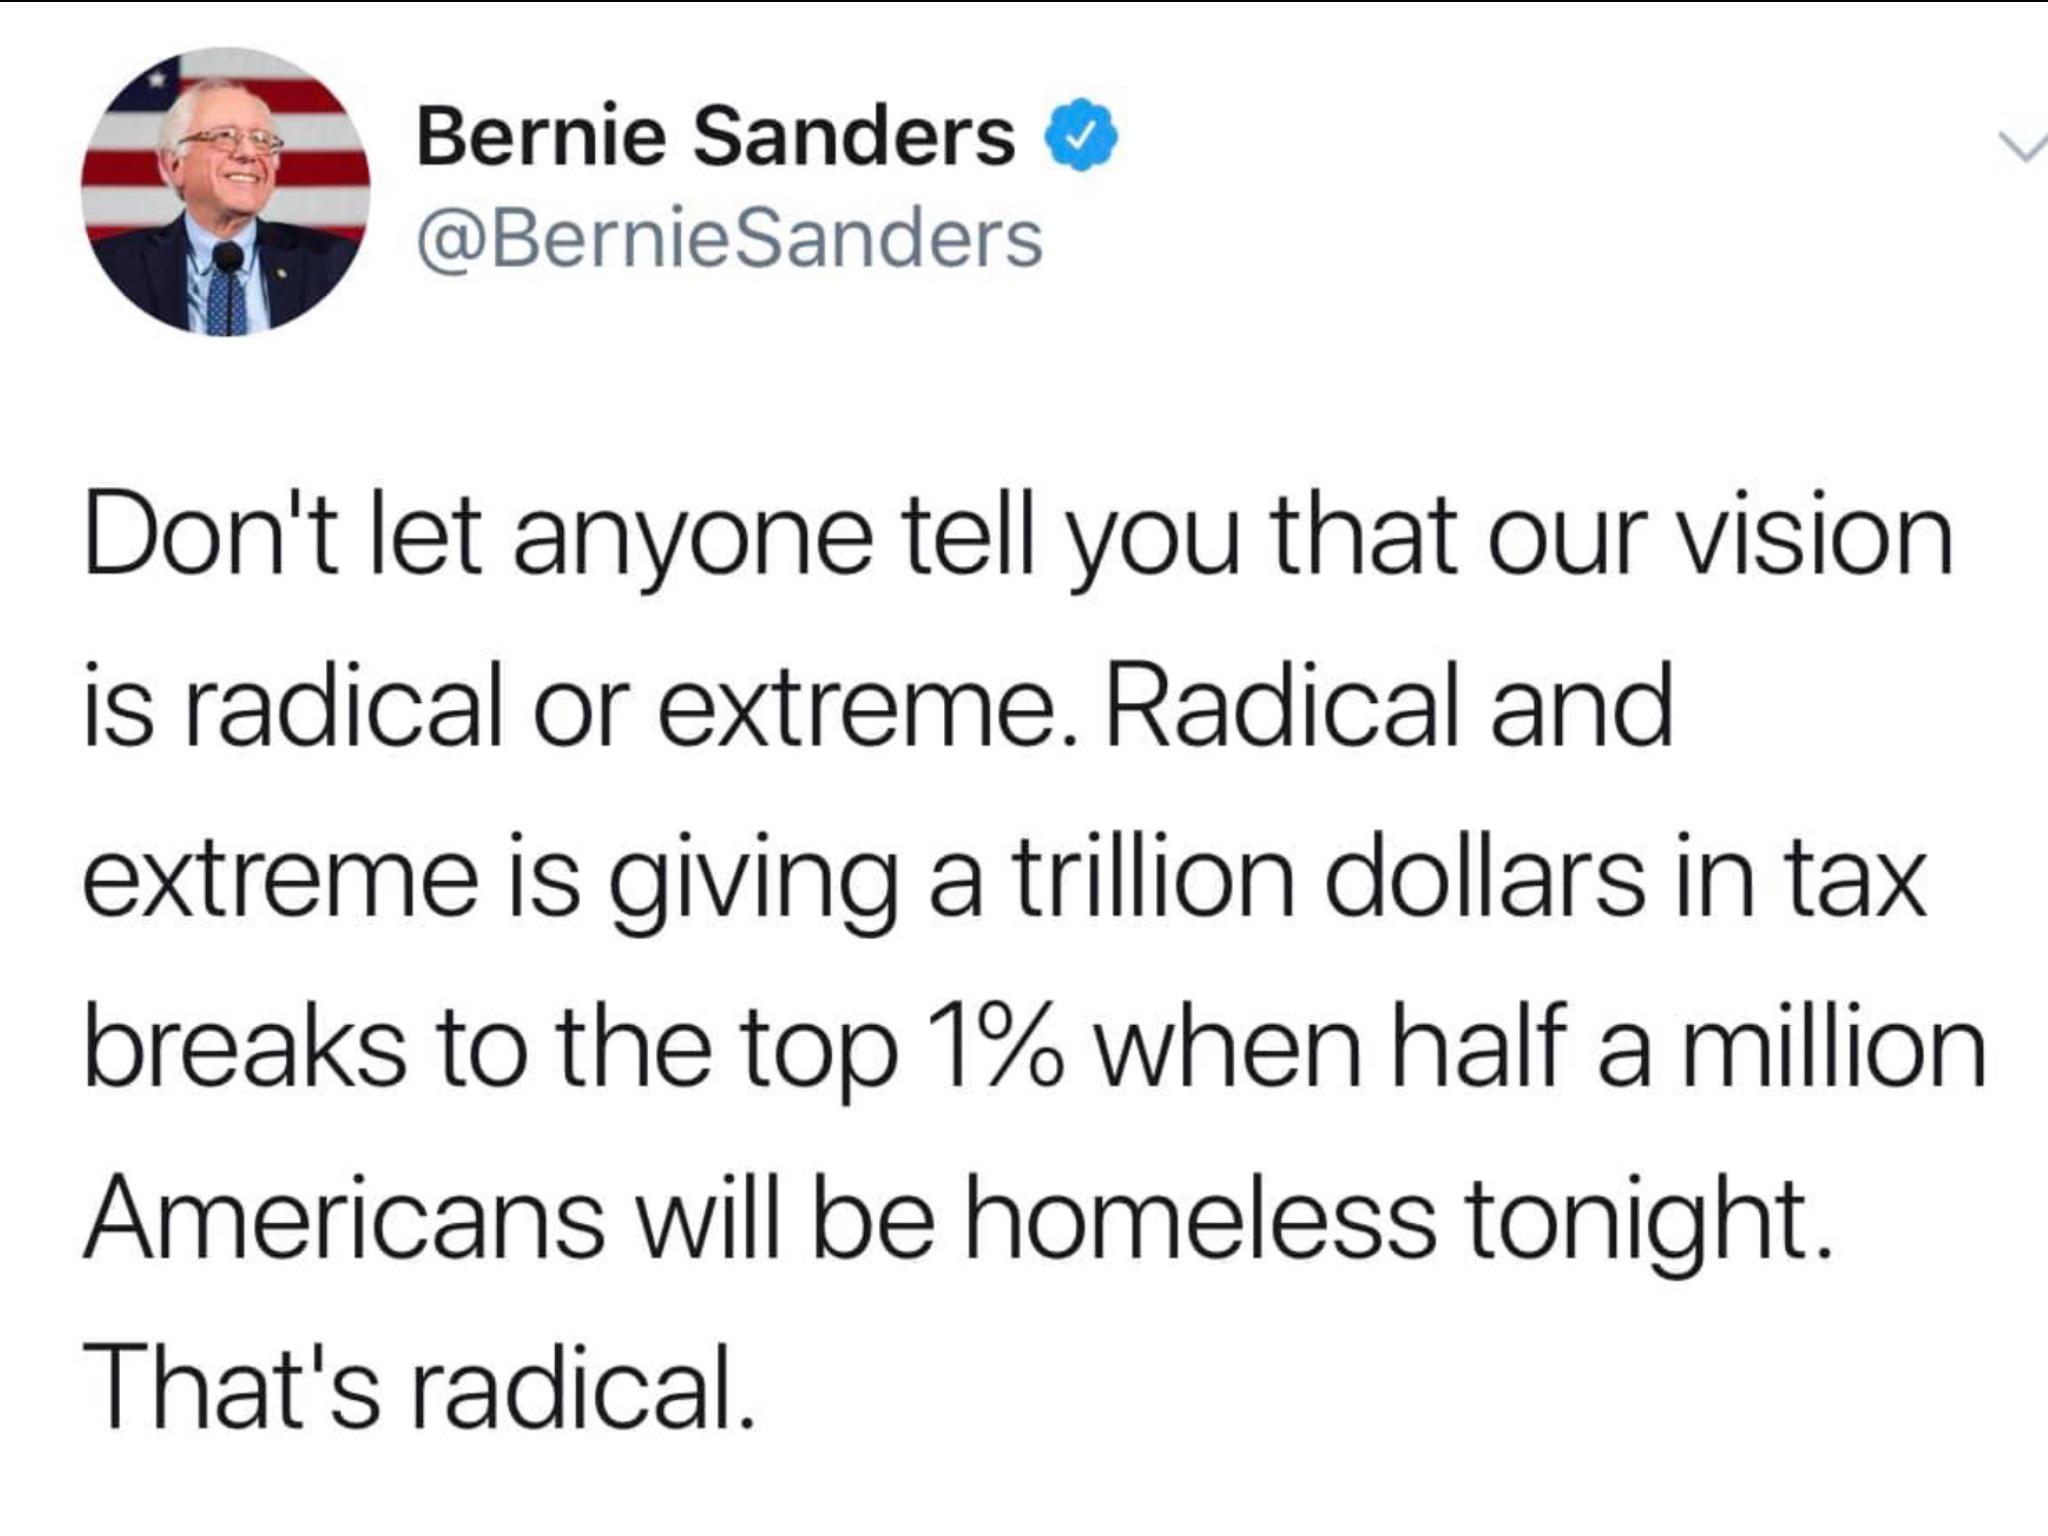 political political-memes political text: Bernie Sanders @BernieSanders Donlt let anyone tell you that our vision is radical or extreme. Radical and extreme is giving a trillion dollars in tax breaks to the top 1% when half a million Americans will be homeless tonight. Thatls radical. 